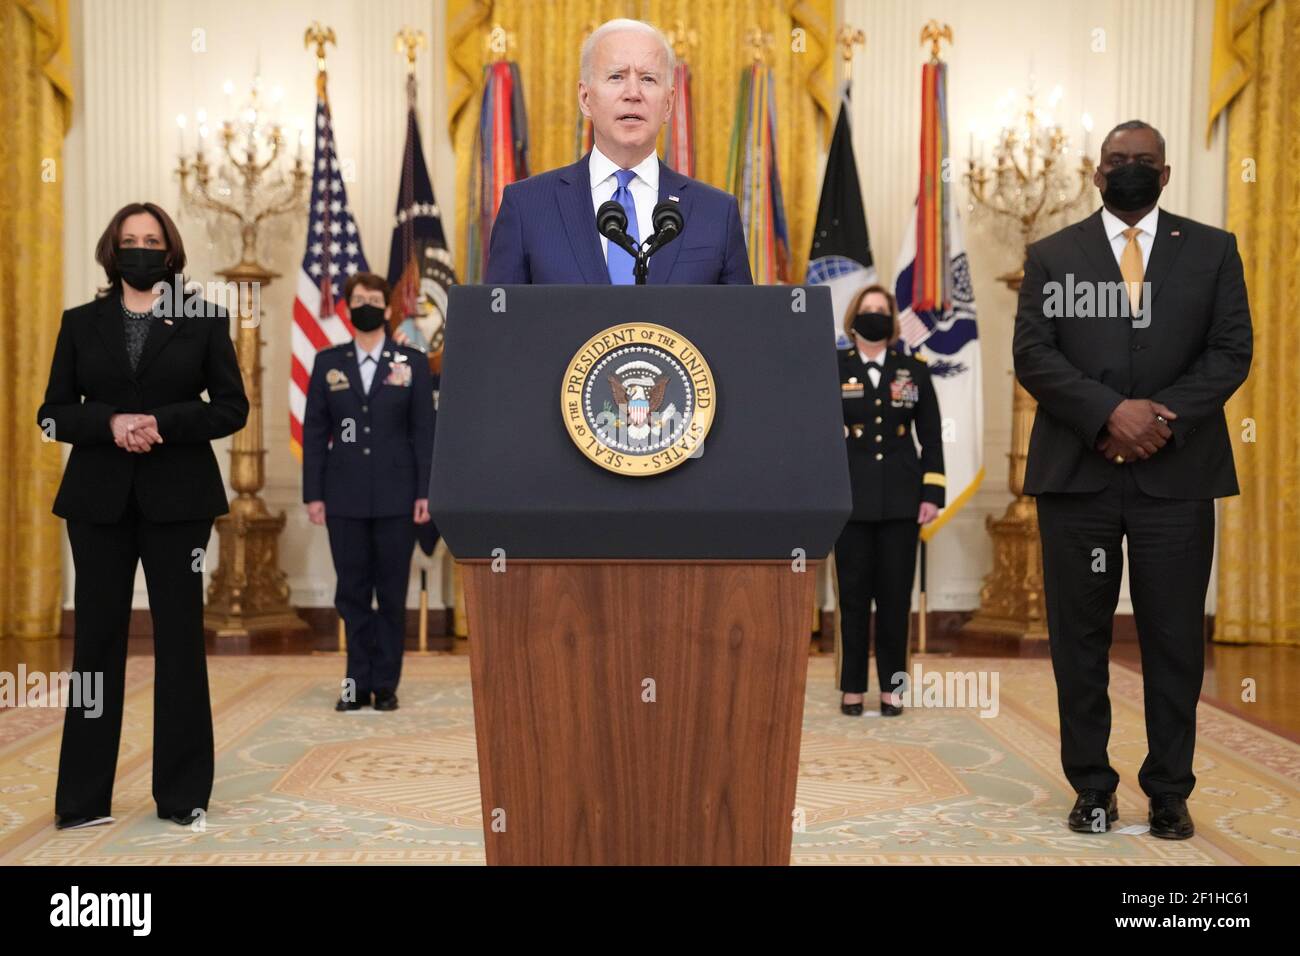 Washington, United States. 08th Mar, 2021. President Joe Biden delivers remarks at a Combatant Commander nomination event for, Air Force Gen. Jacqueline Van Ovost and Army Lt. Gen. Laura Richardson in the East Room at the White House in Washington, DC on Monday, March 8, 2021. Ovost, has been nominated to lead the Transportation Command and Richardson, has been nominated to lead military activities in Latin America at Southern Command. Biden was joined by Vice President Kamala Harris and Defense Secretary Lloyd Austin. Photo by Kevin Dietsch/UPI Credit: UPI/Alamy Live News Stock Photo